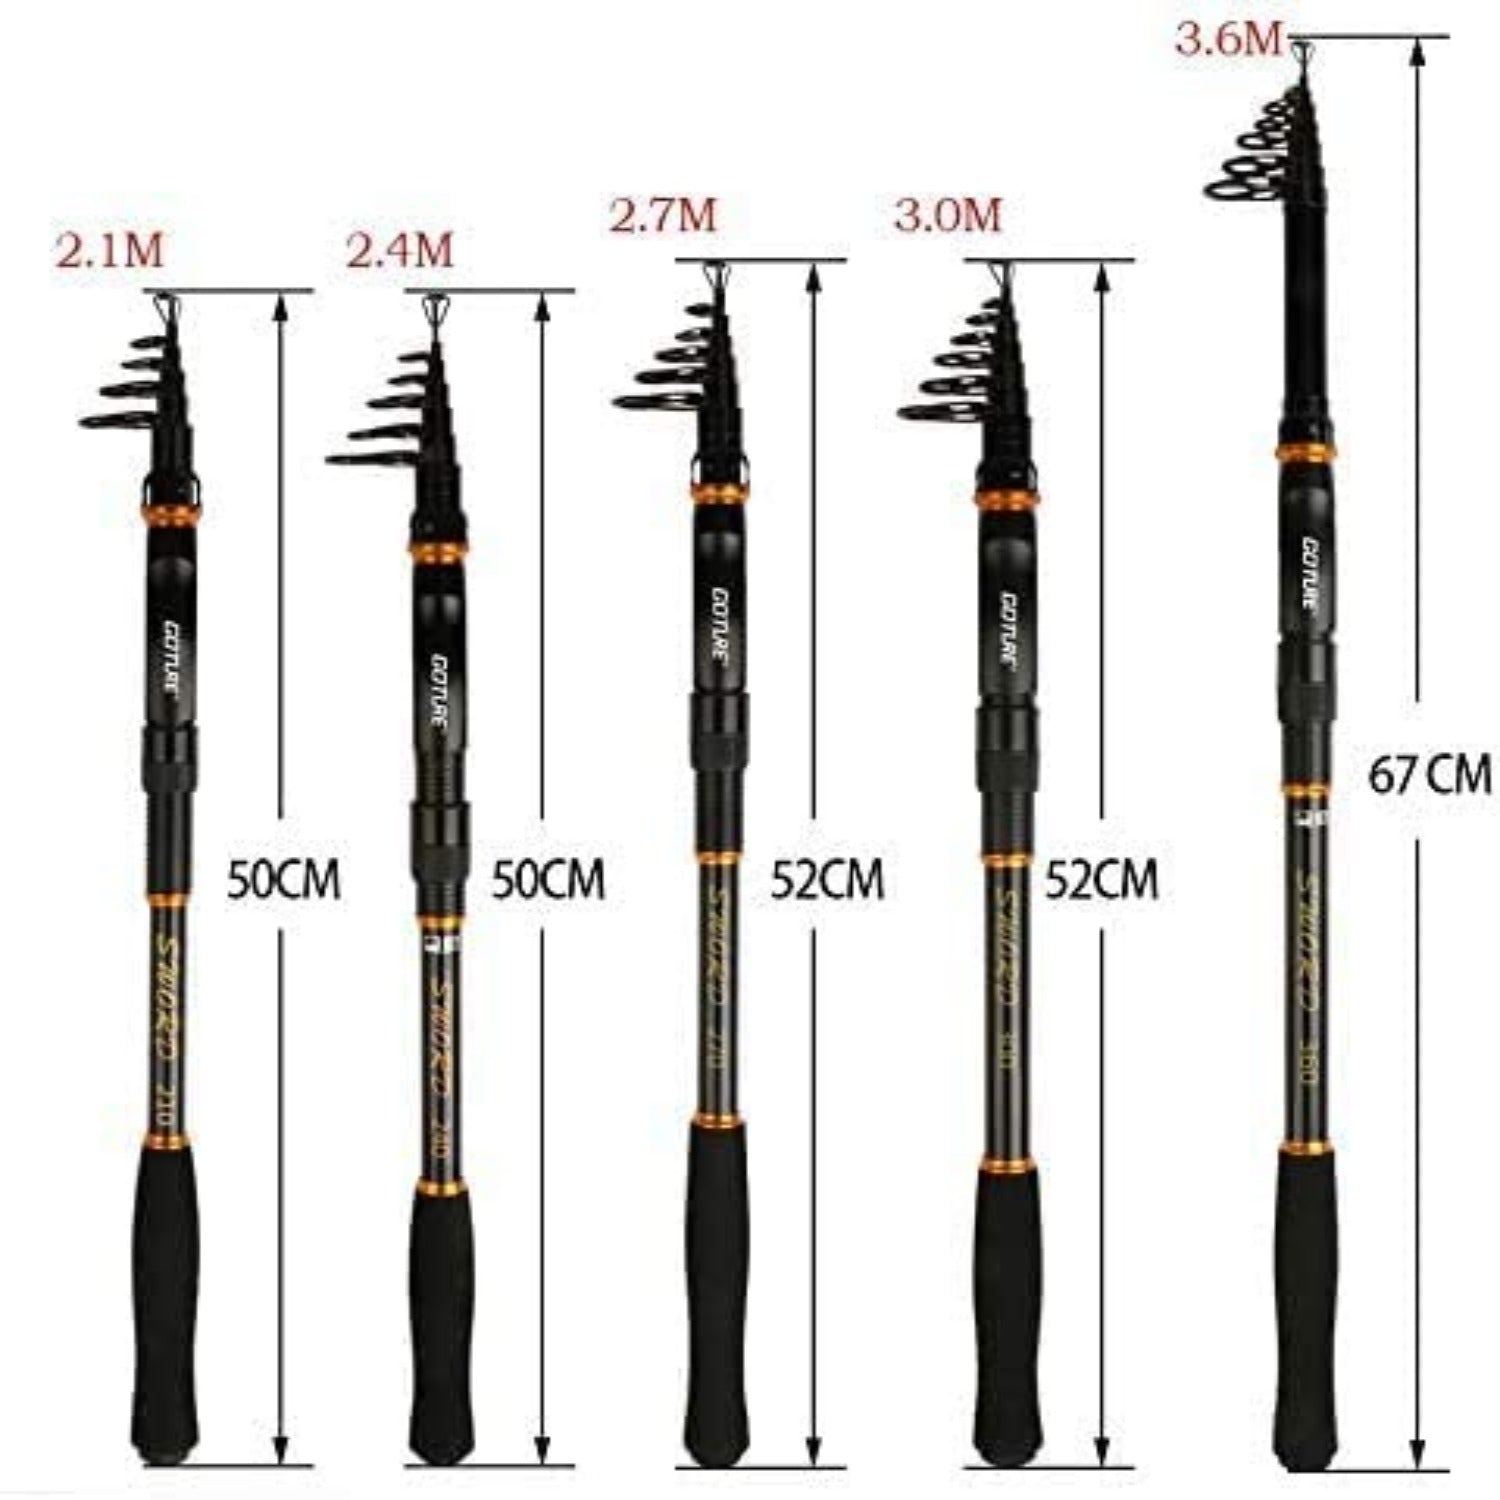 Goture Telescopic Fishing Rod Spinning Reel Combos Carbon Fiber